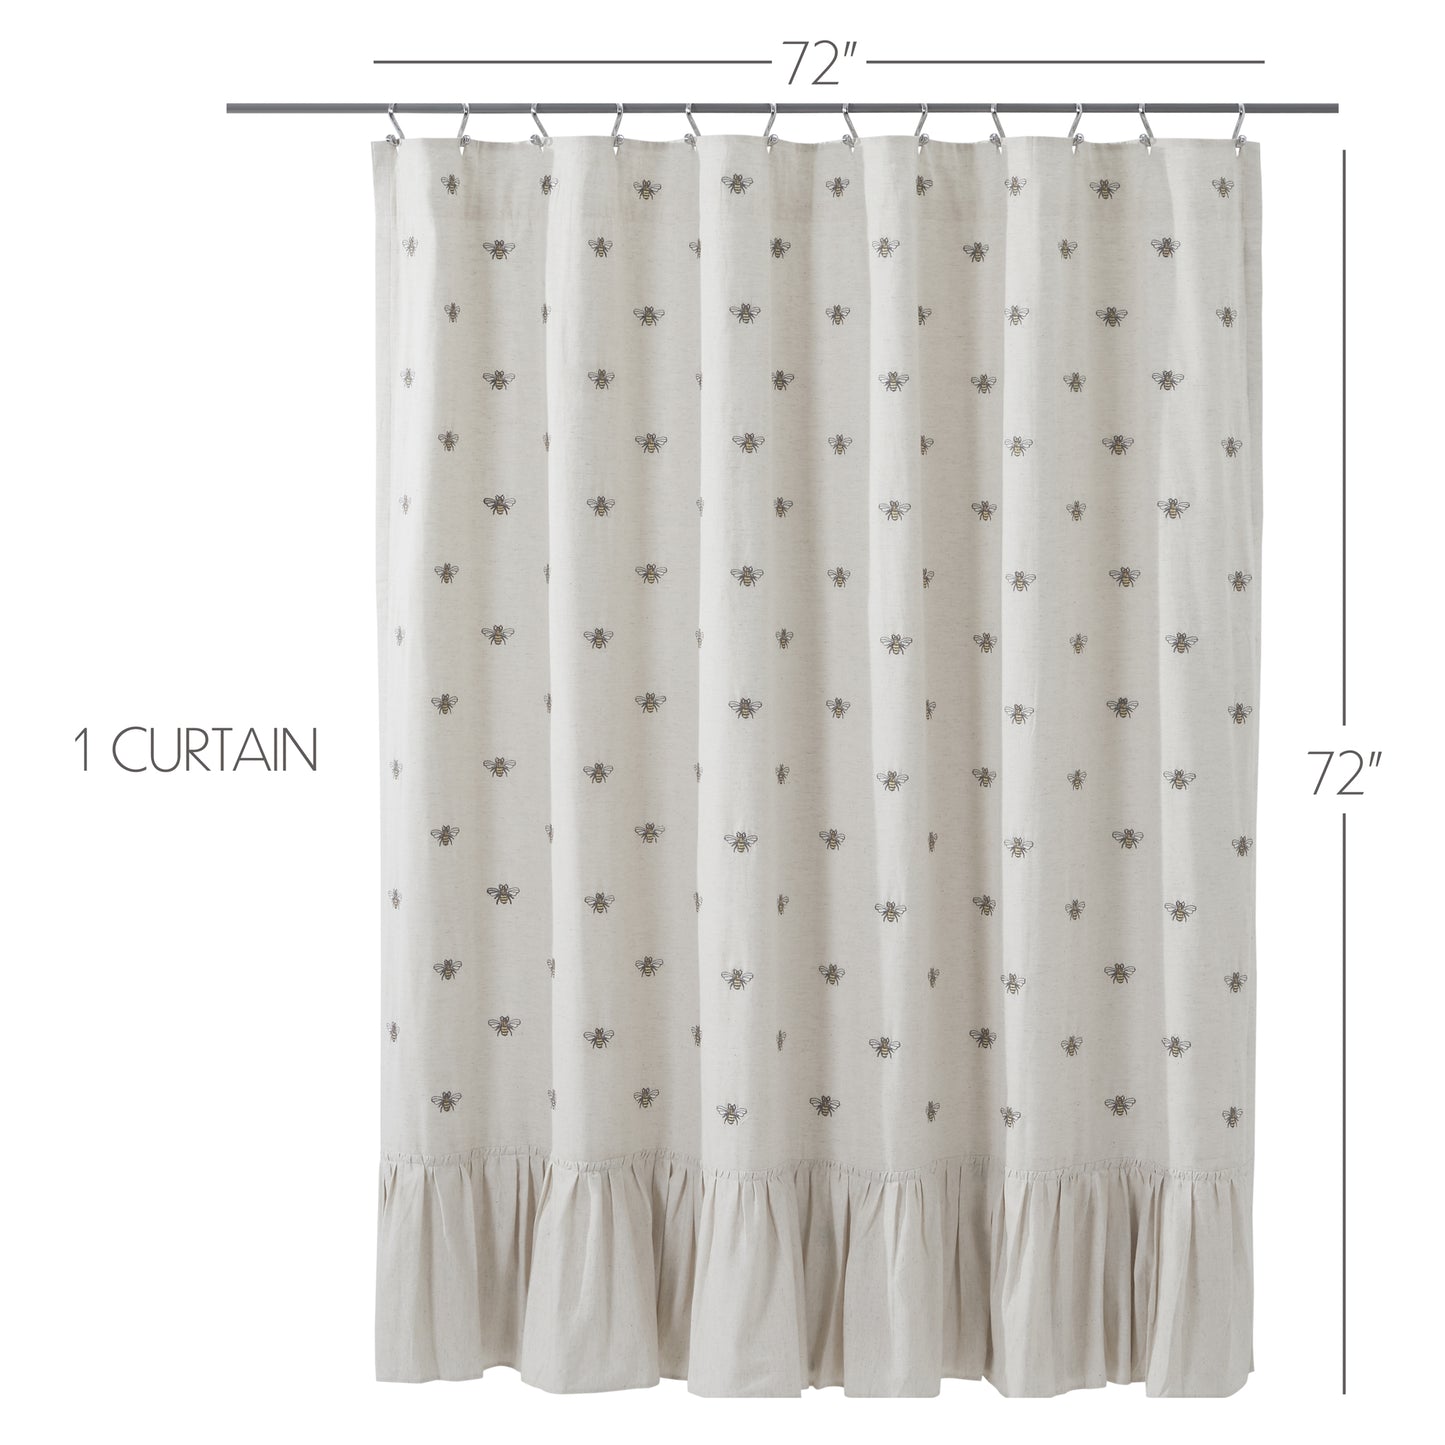 81266-Embroidered-Bee-Shower-Curtain-72x72-image-1